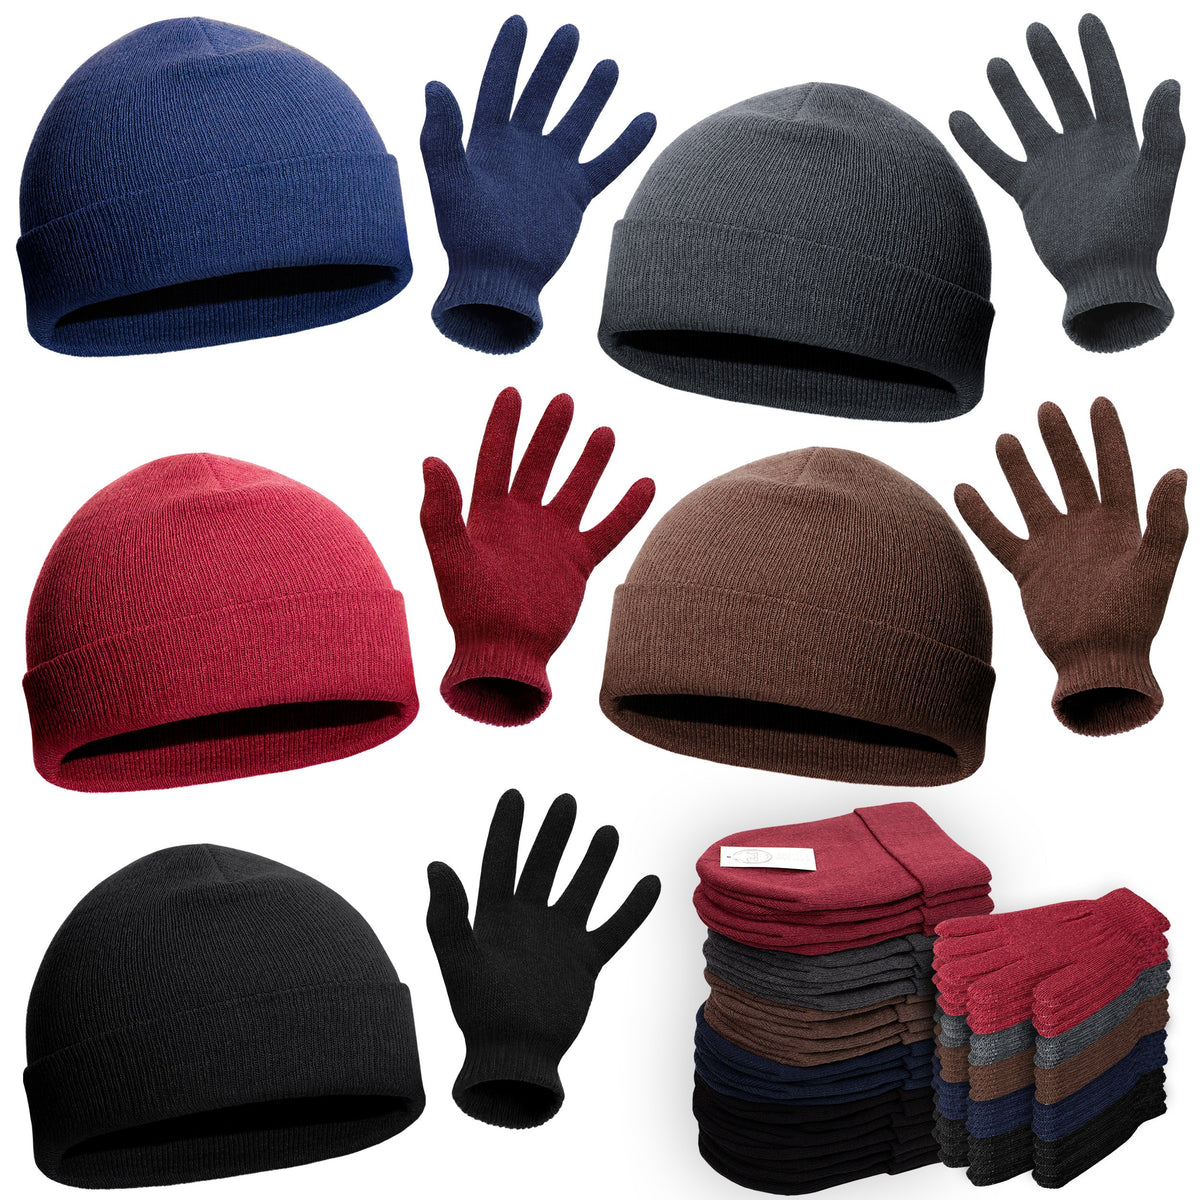 Buy 24 Set Wholesale Beanie and Glove Bundle in 5 Assorted Colors - Bulk Case of 24 Beanies, 24 Pairs of Gloves